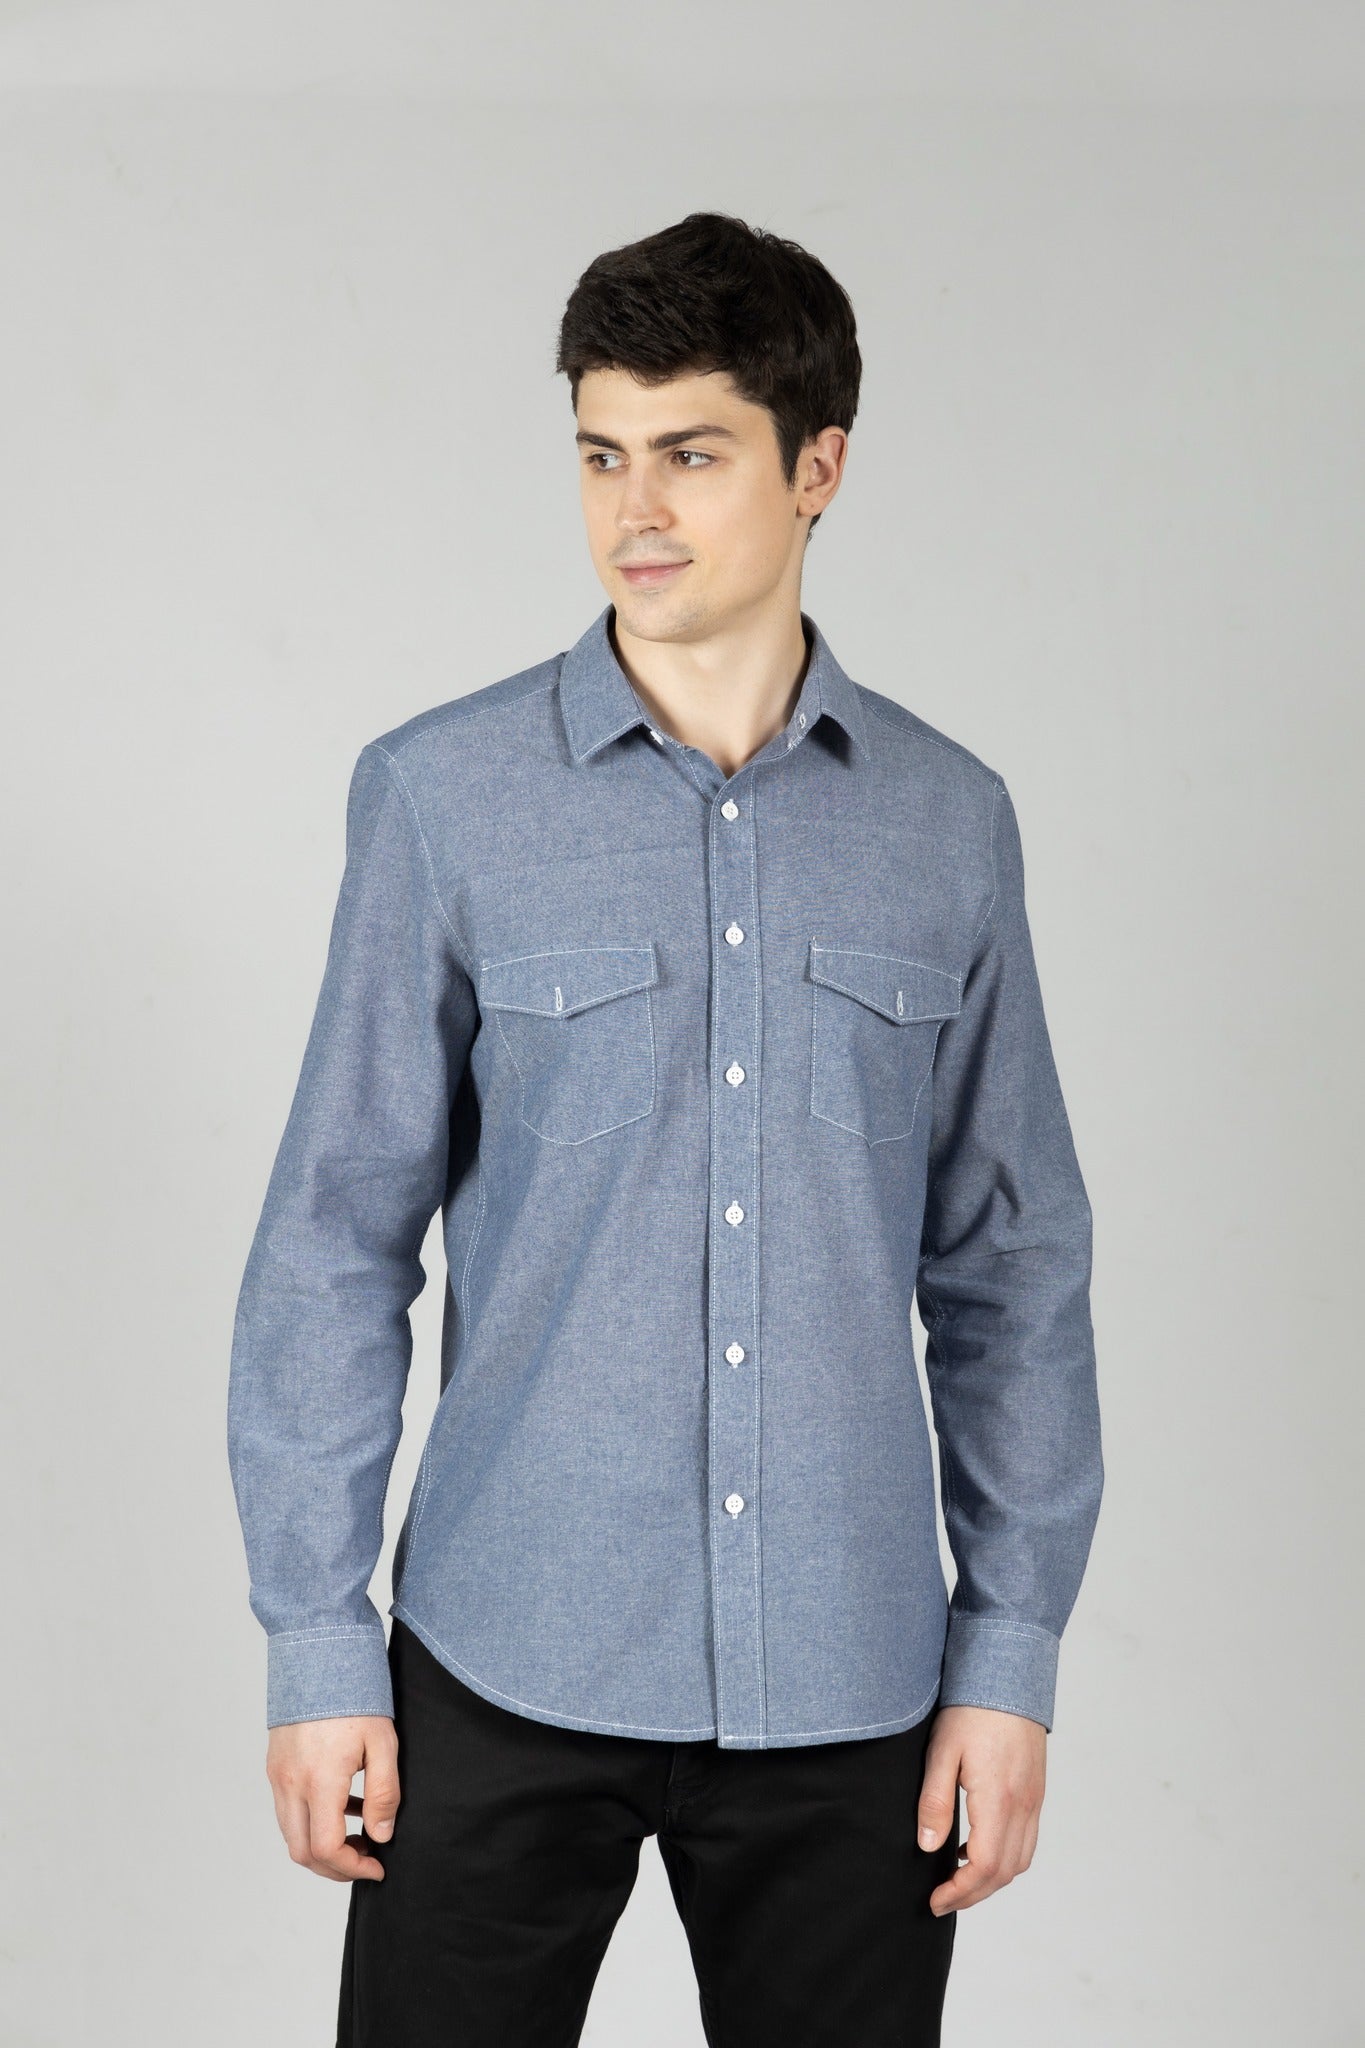 Light Blue Chambray Men's Shirt in Cotton with Double Pockets & Contrast Stitch - OZMOD